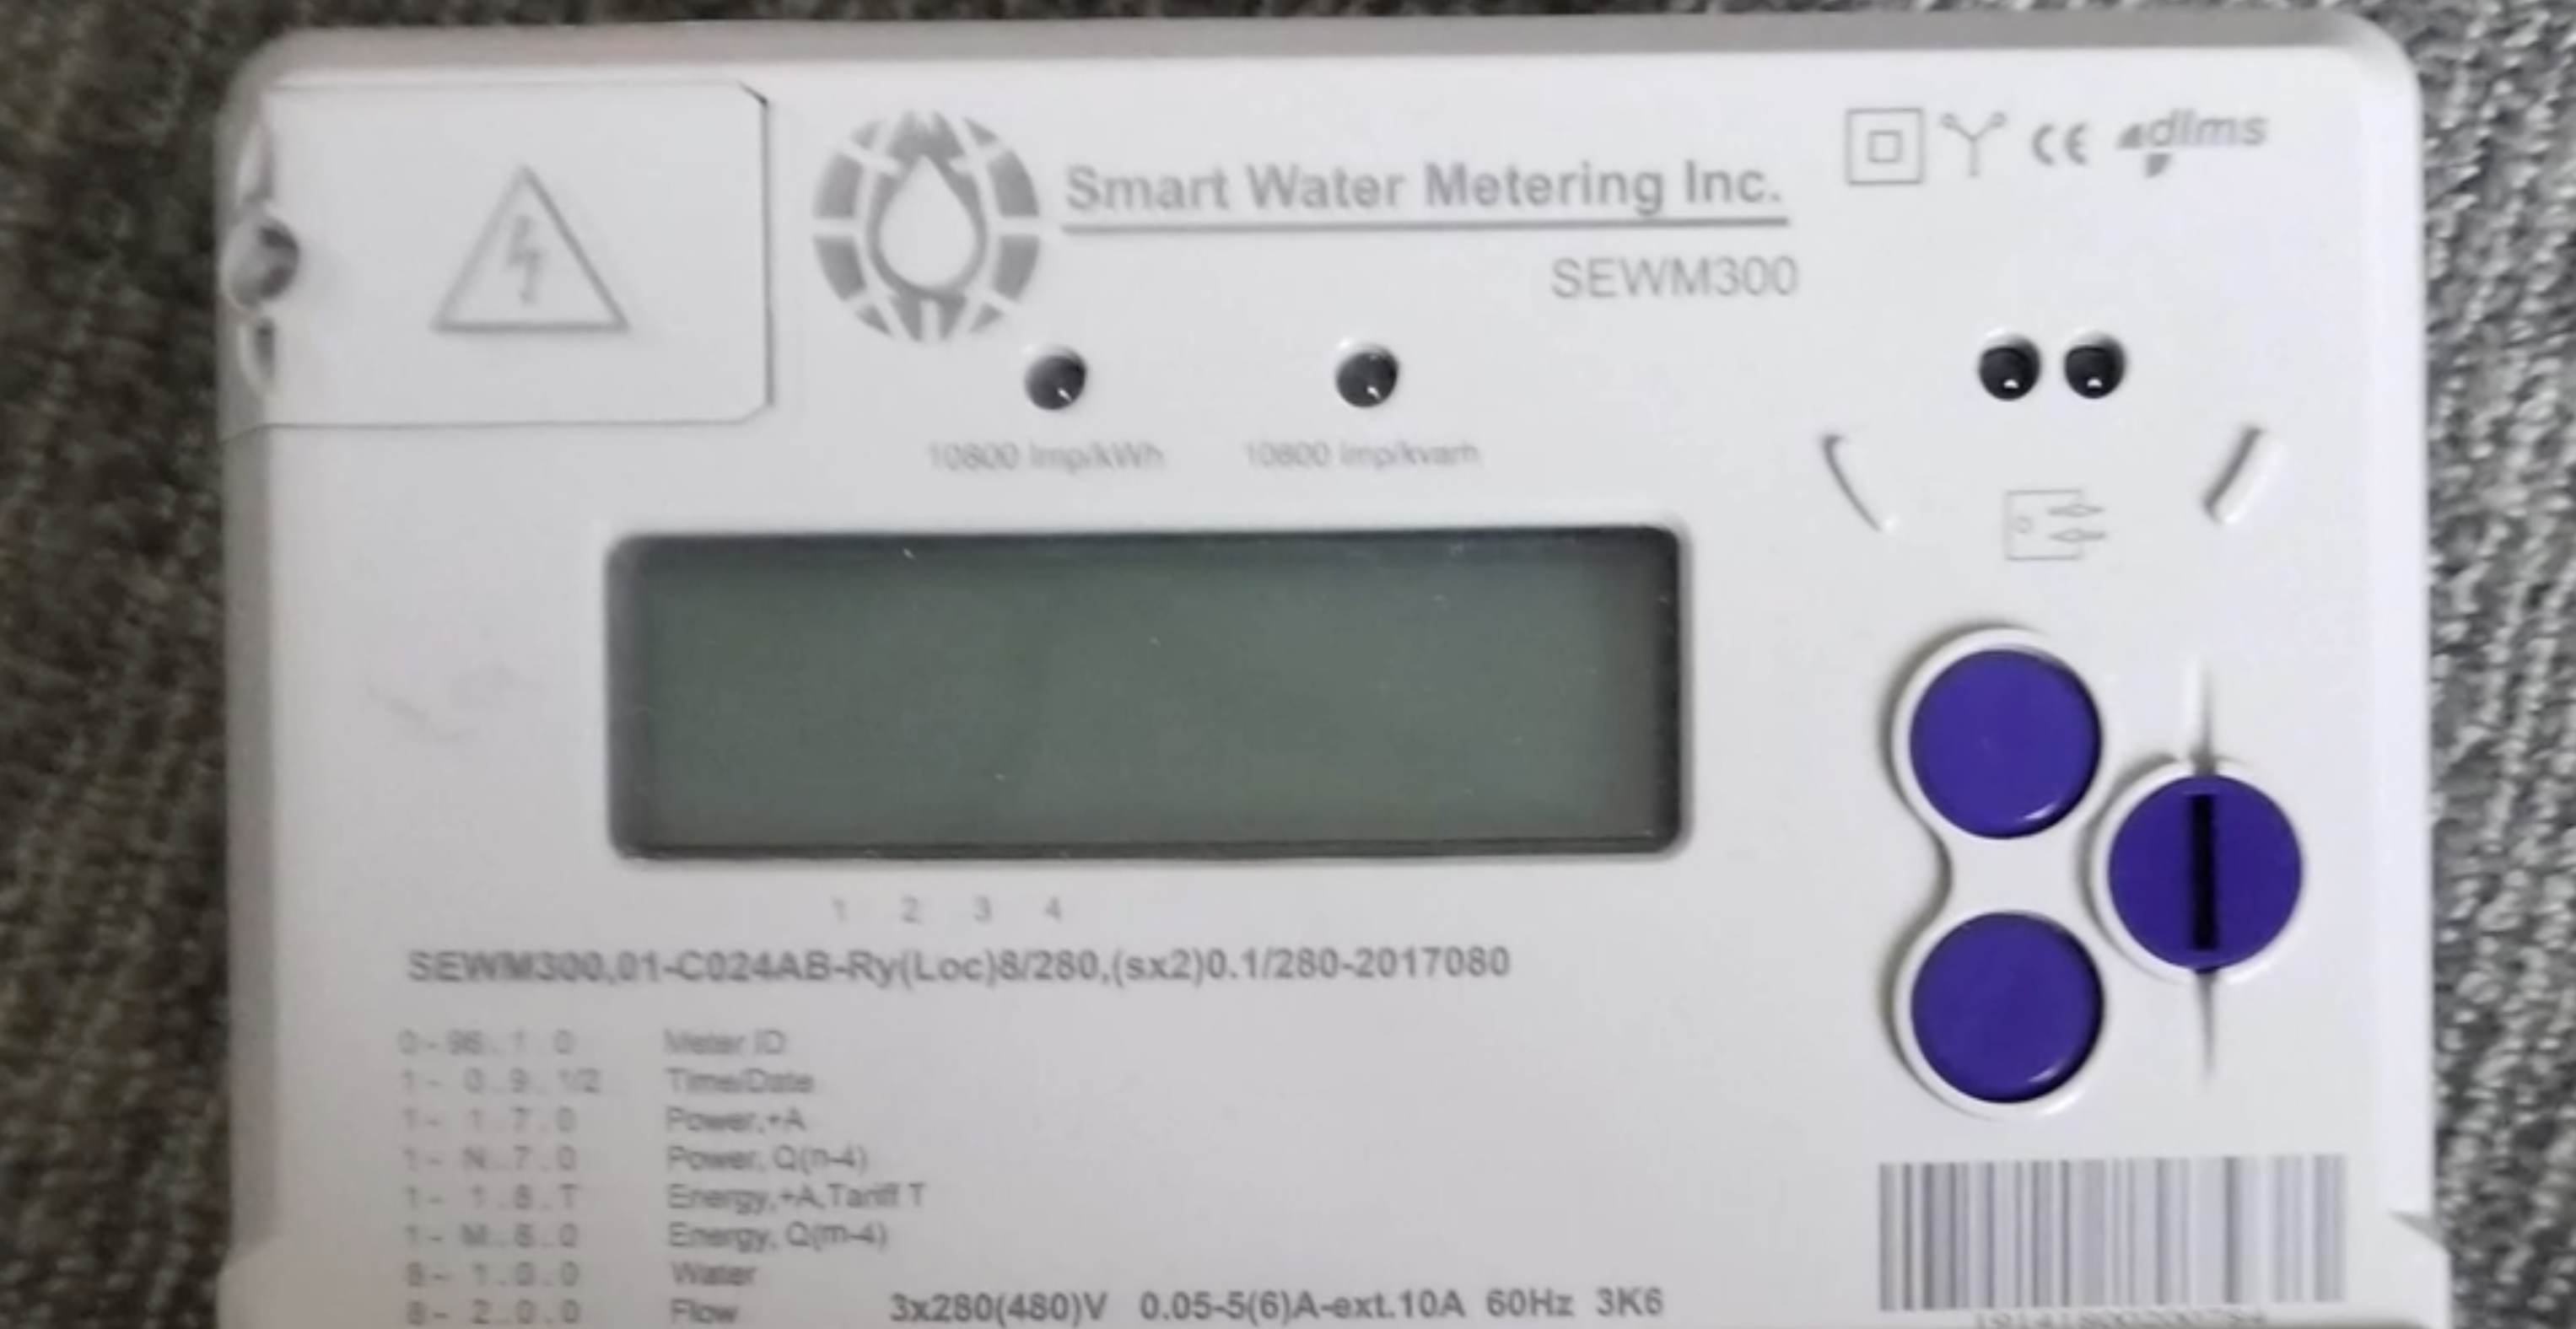 A Smart Water Metering device will allow farmers to retrieve, store and visualize water pump energy measurements without relying on cellular connections.